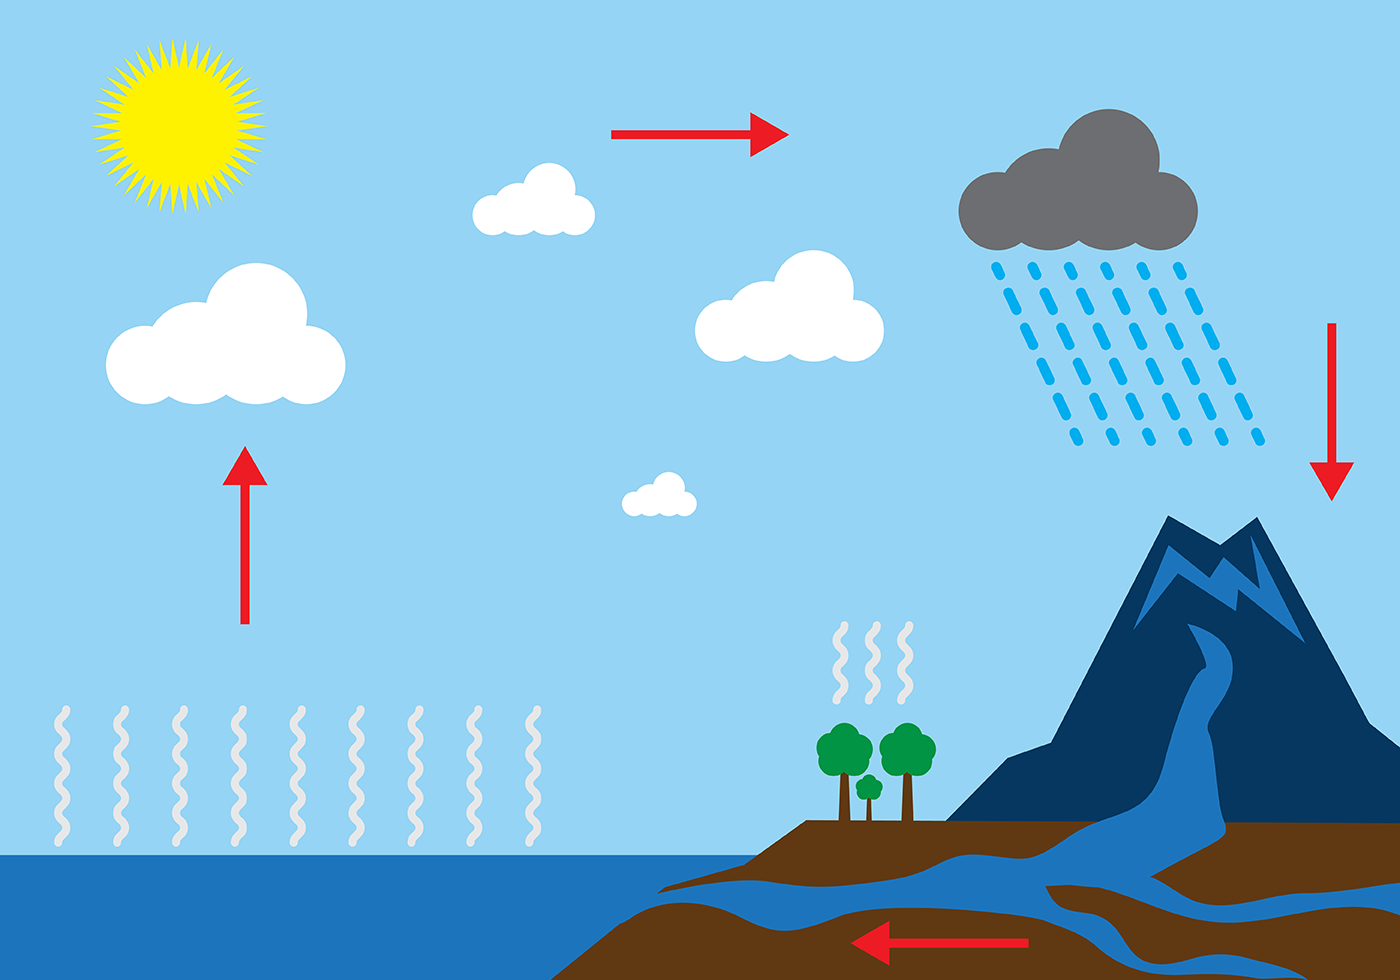 simple presentation water cycle